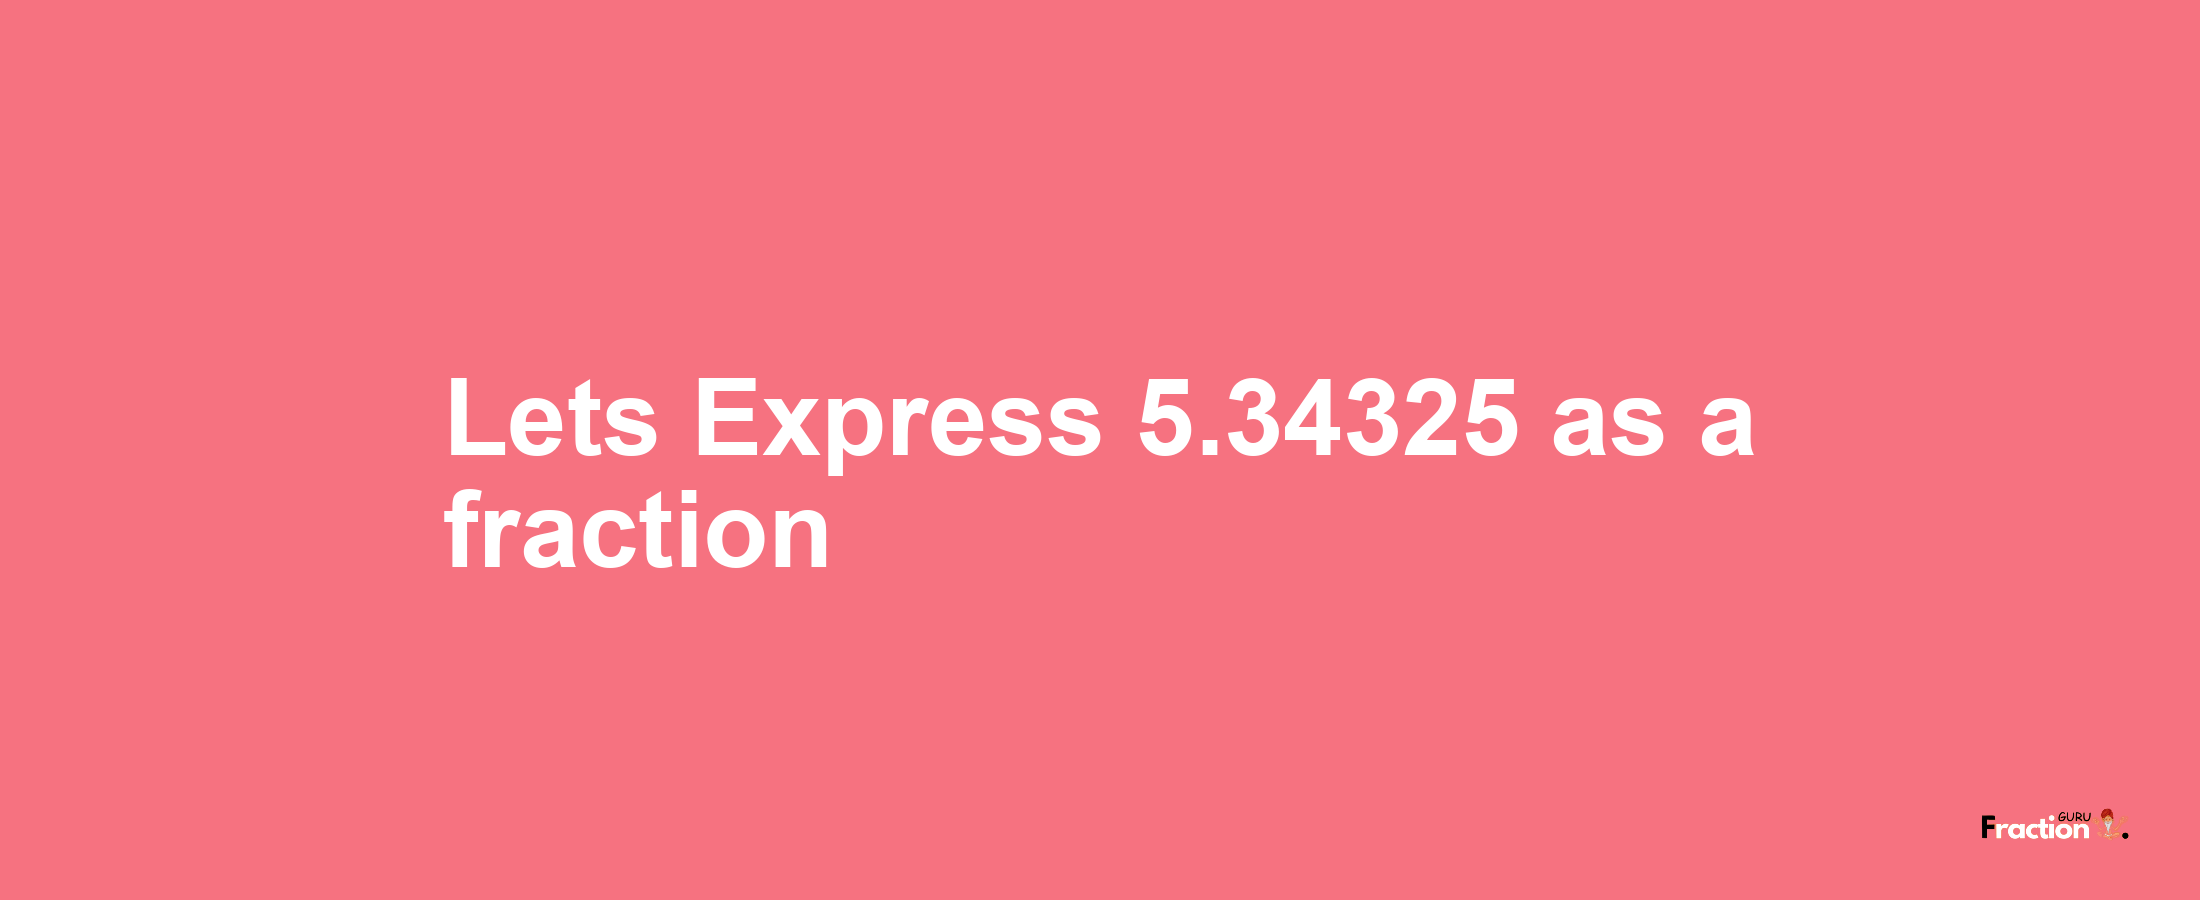 Lets Express 5.34325 as afraction